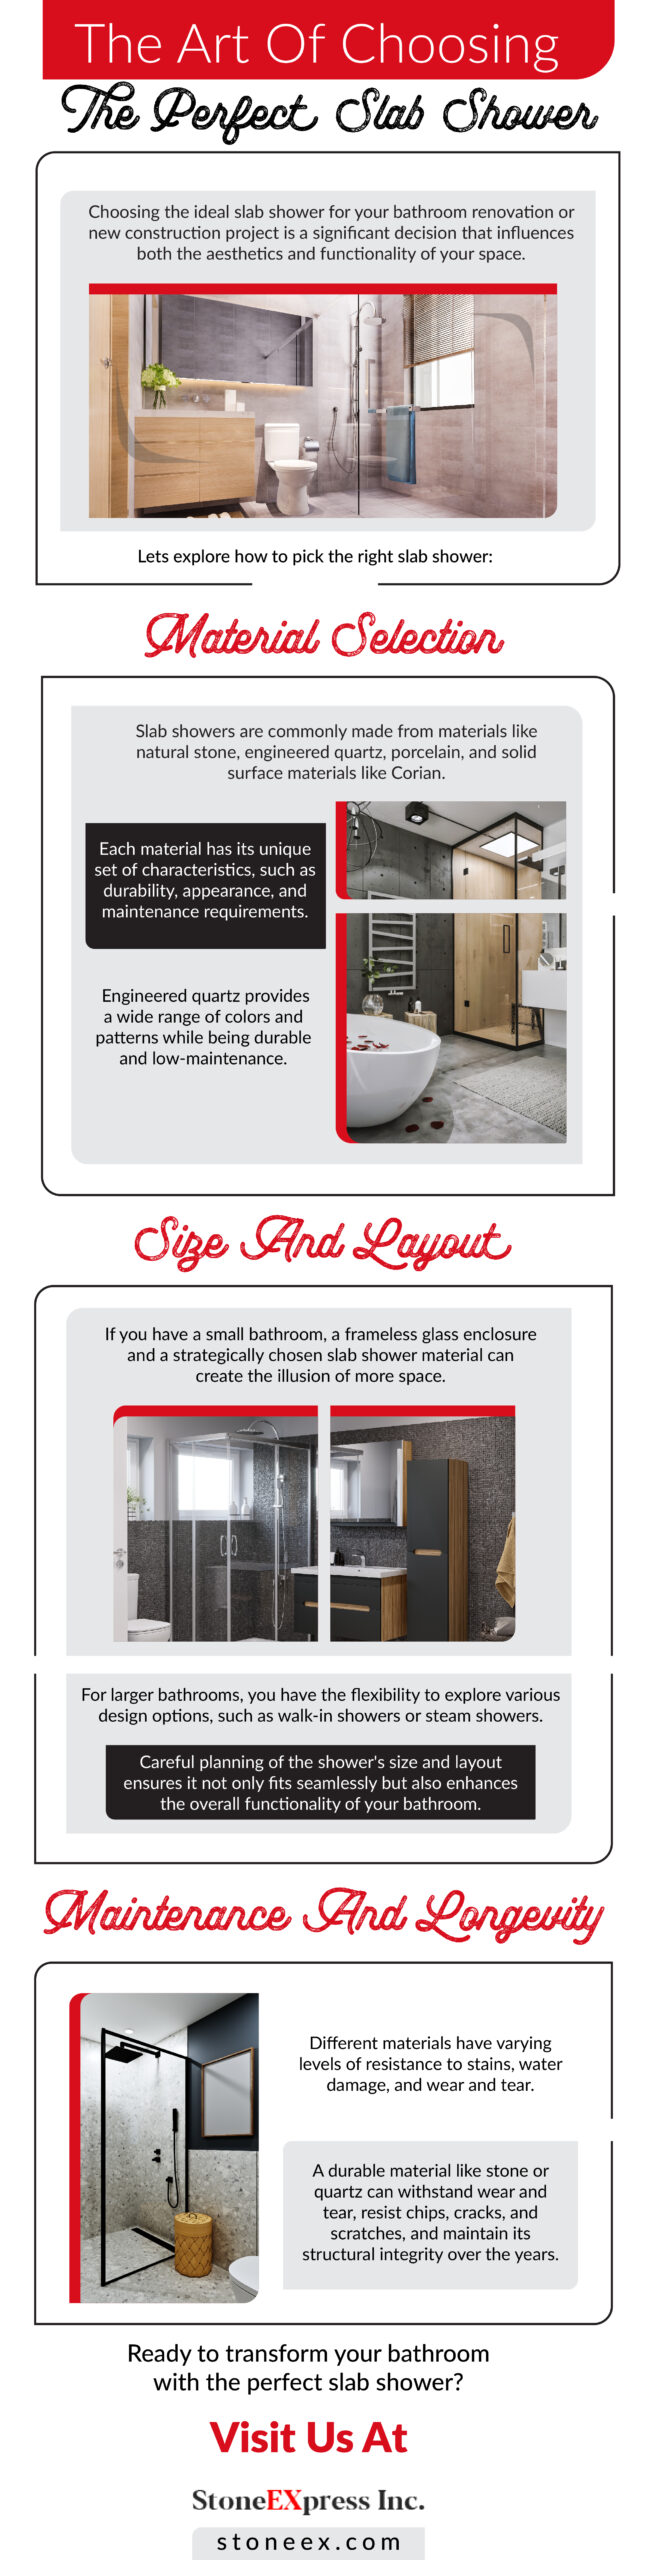 The Art Of Choosing: The Perfect Slab Shower Infograph